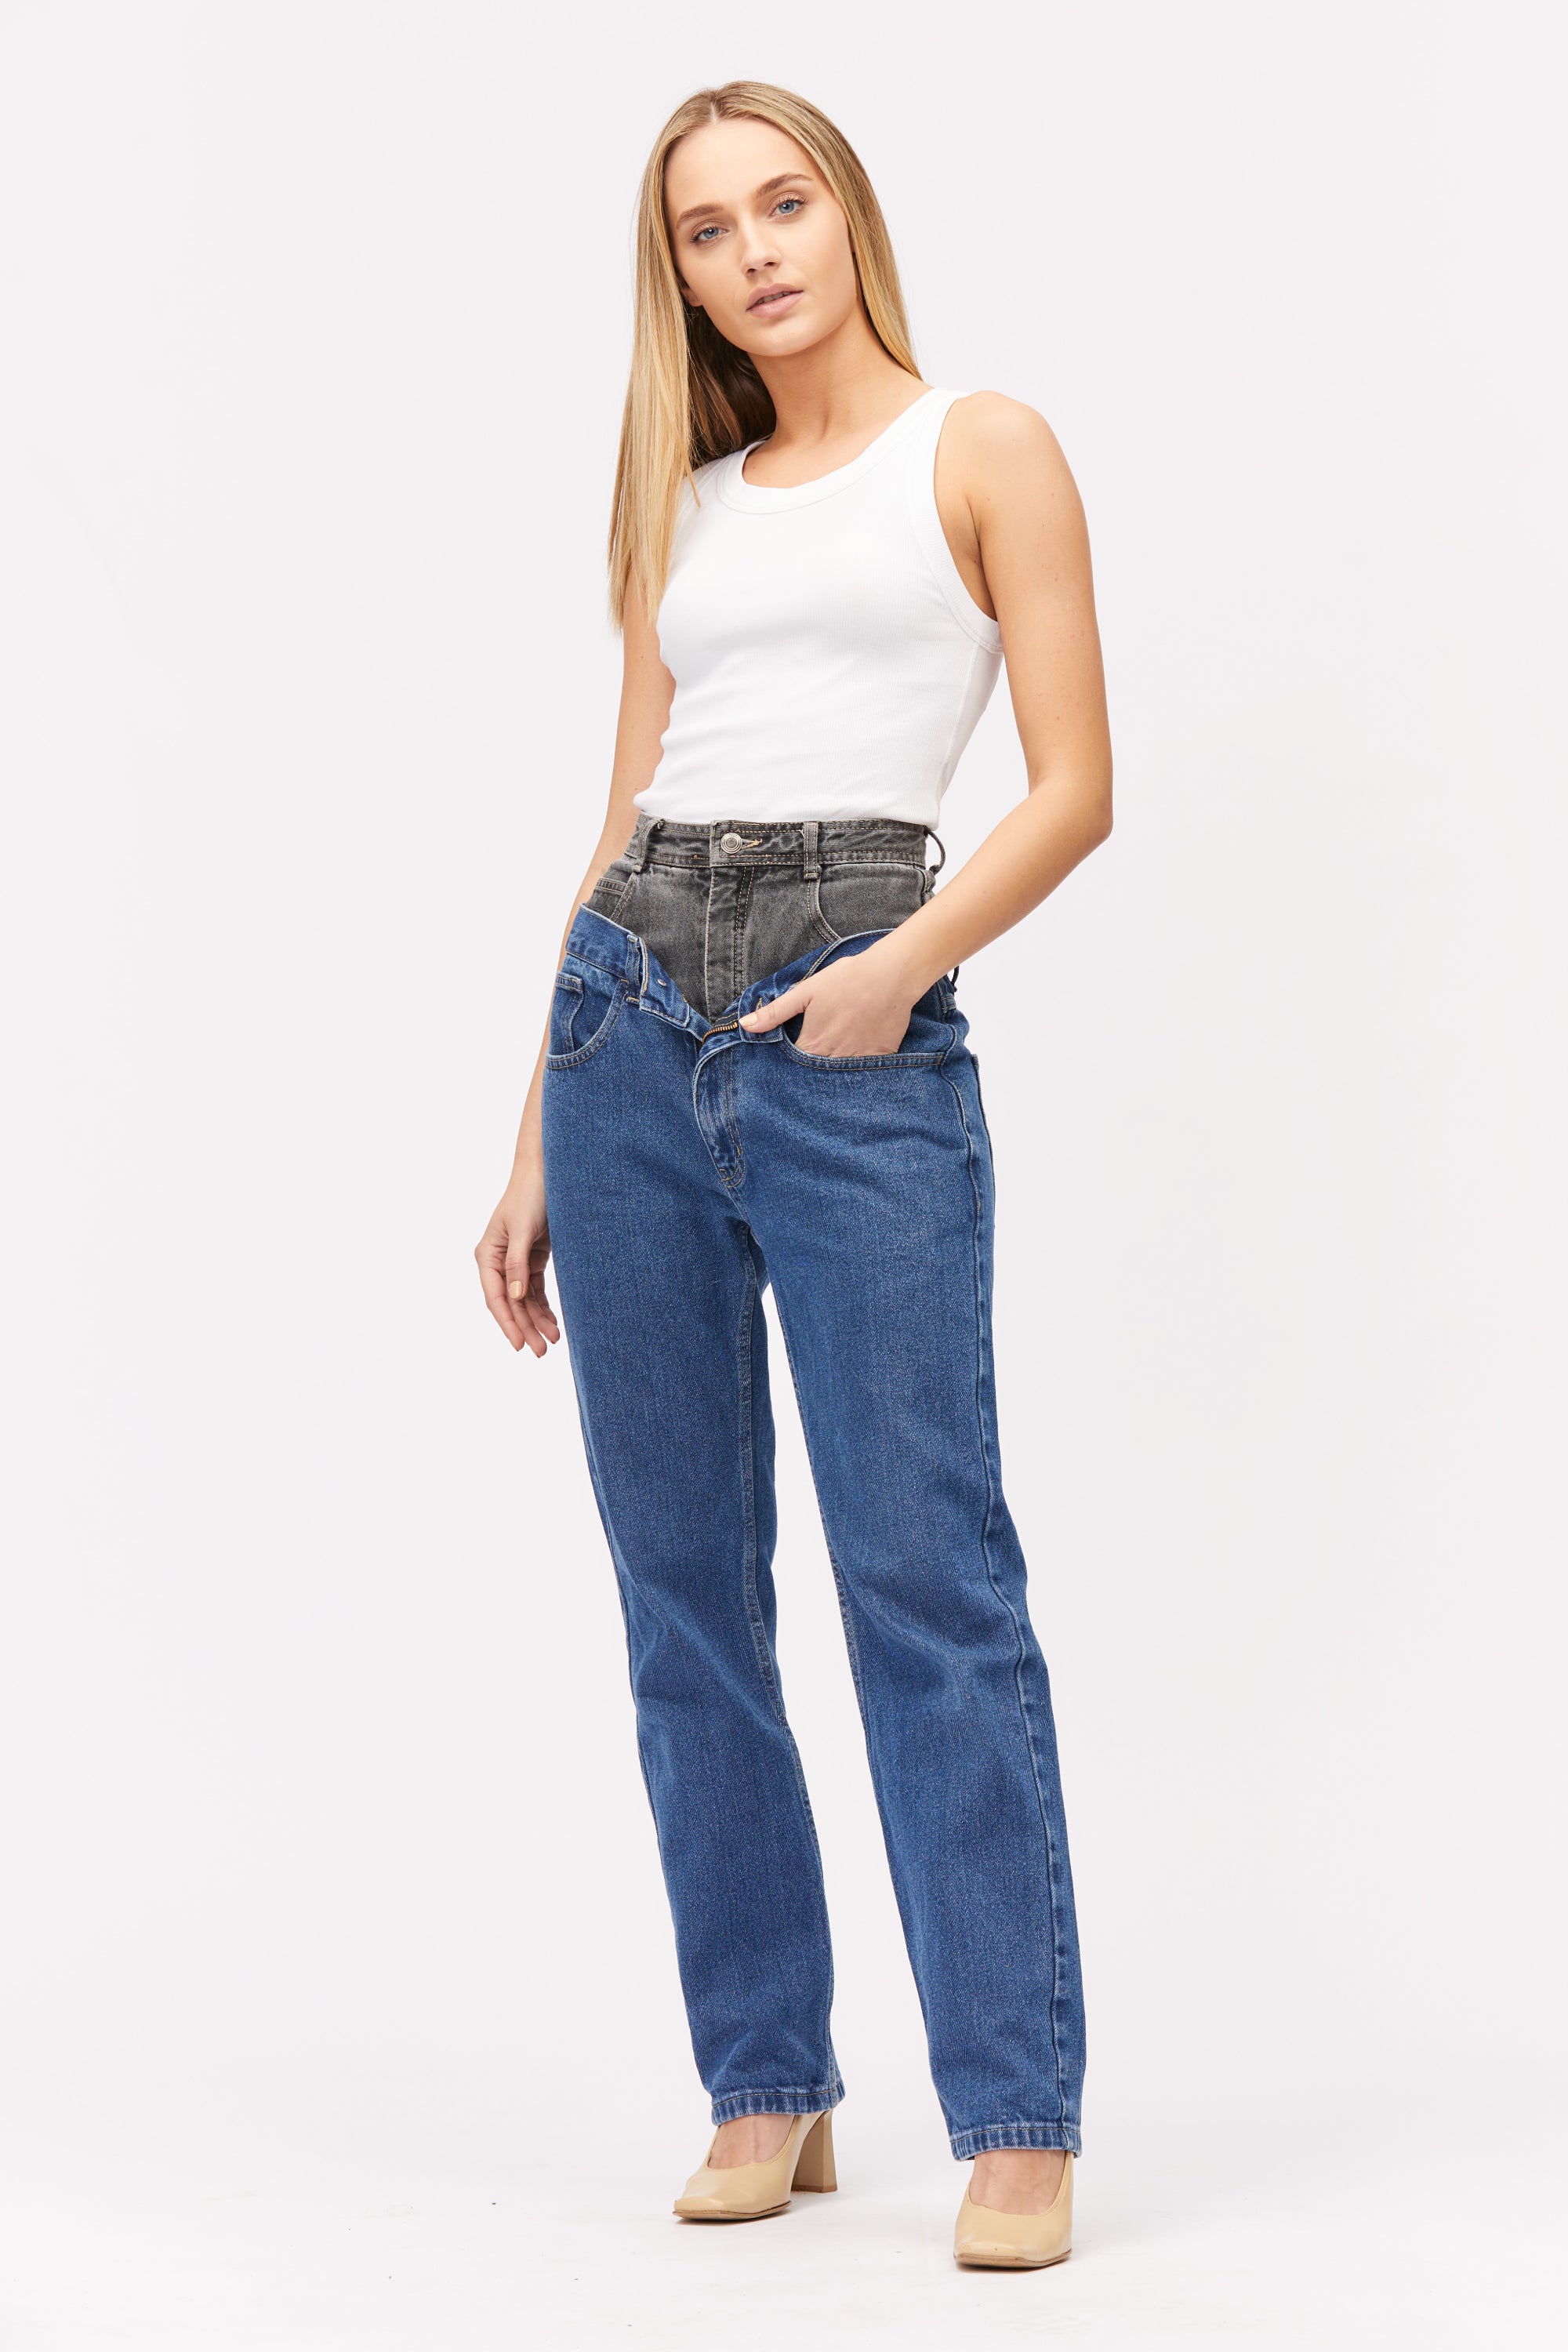 2IN1JEANS - SIZE XS